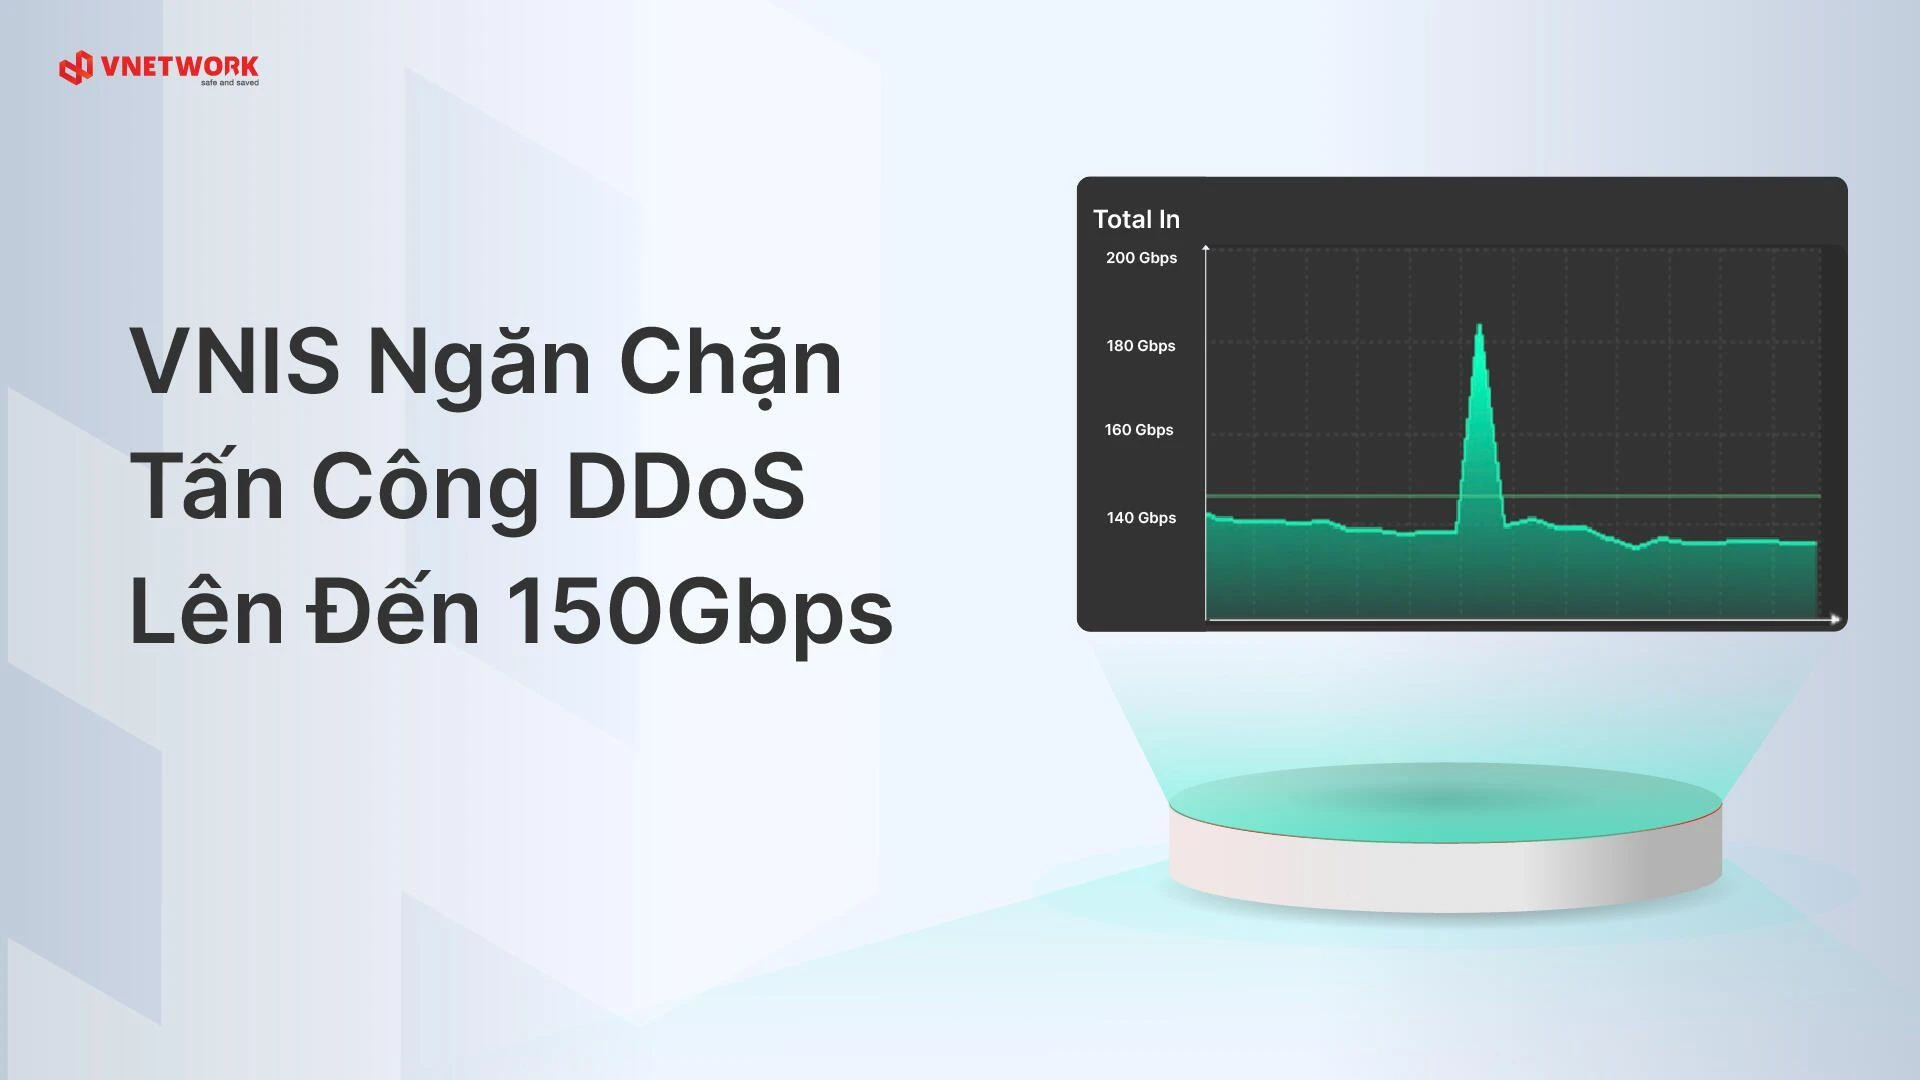 VNIS platform successfully prevents DDoS attacks  up to 150Gbps